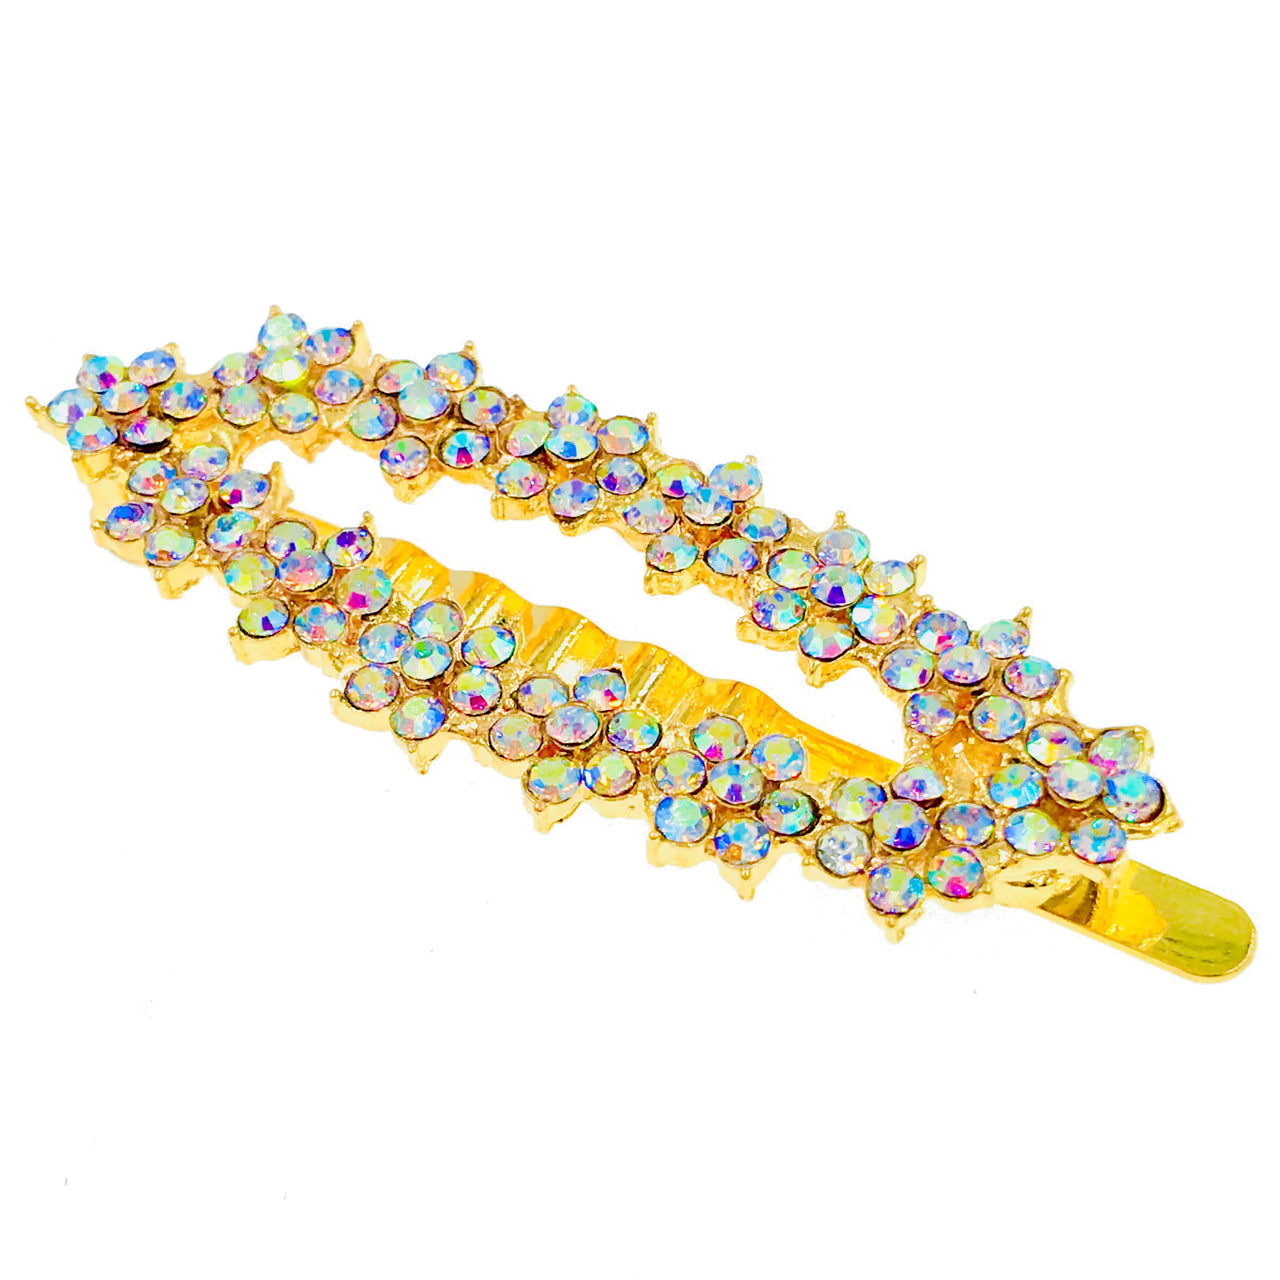 Elongated Oval Bouquet Magnetic Hair Clip Rhinestone Crystal gold base Pink Purple Red Brown Blue Black Green, Magnetic Clip - MOGHANT